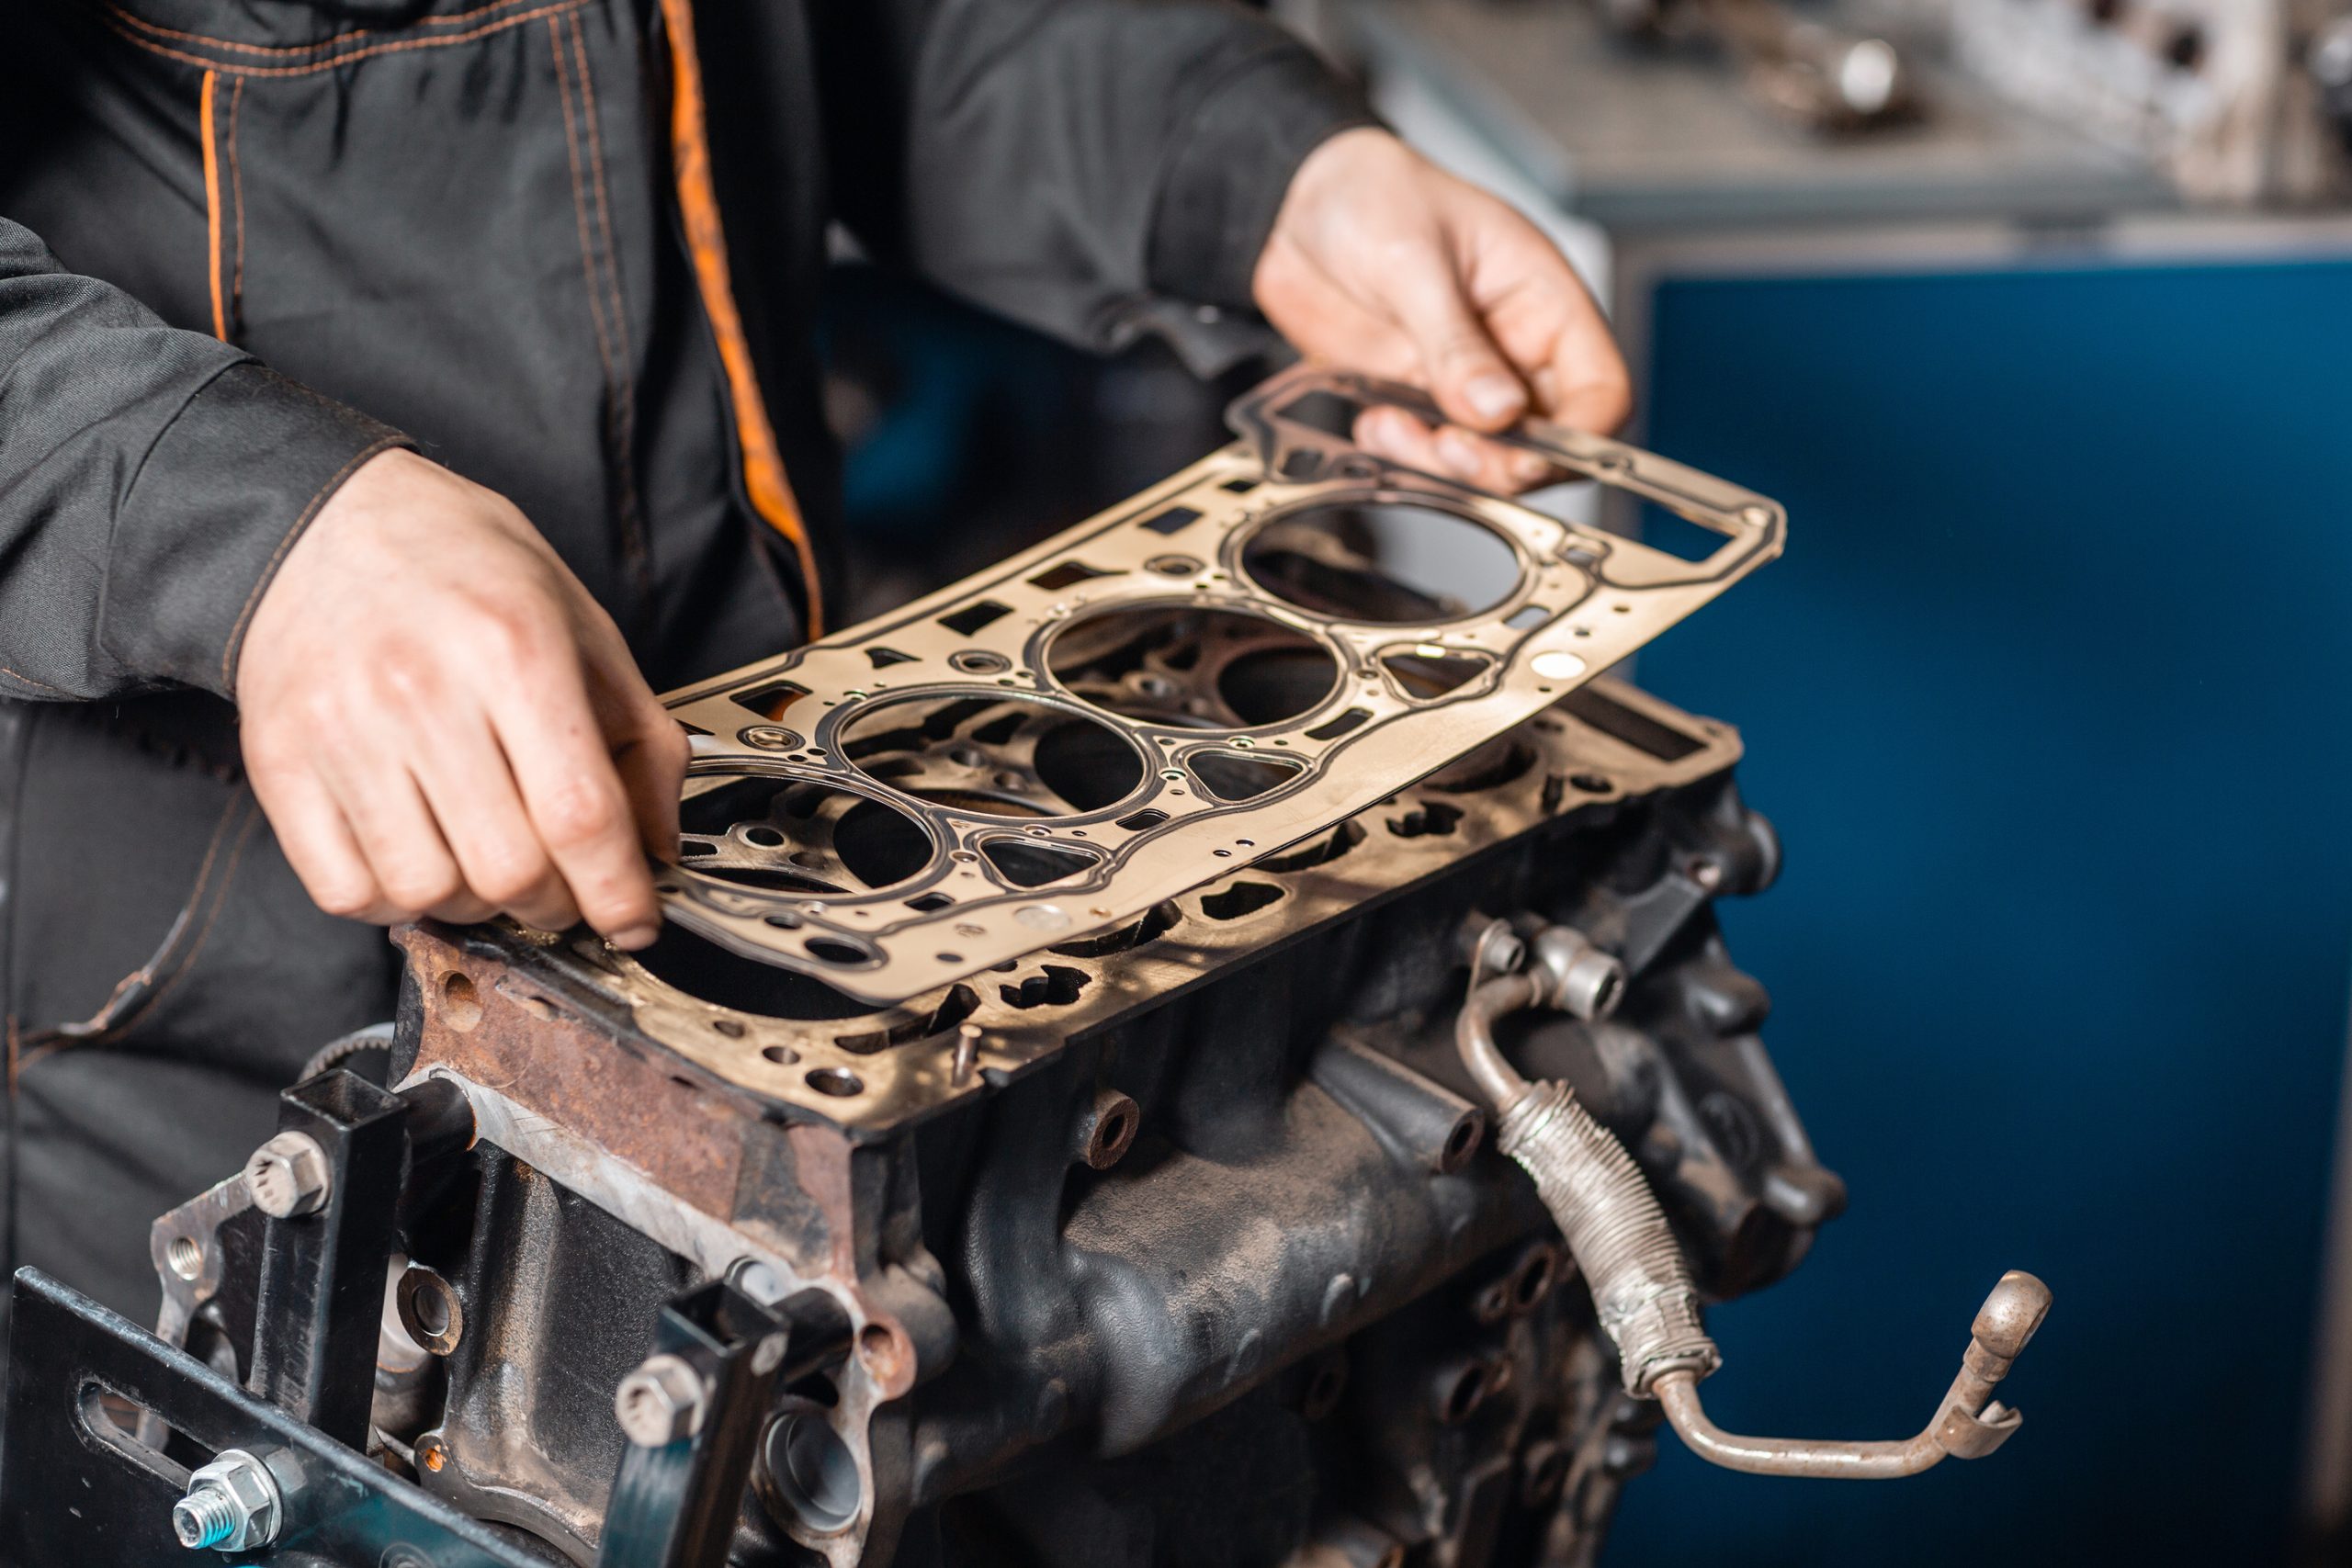 Can A Blown Head Gasket Be Repaired Or Does The Engine Need To Be Replaced?